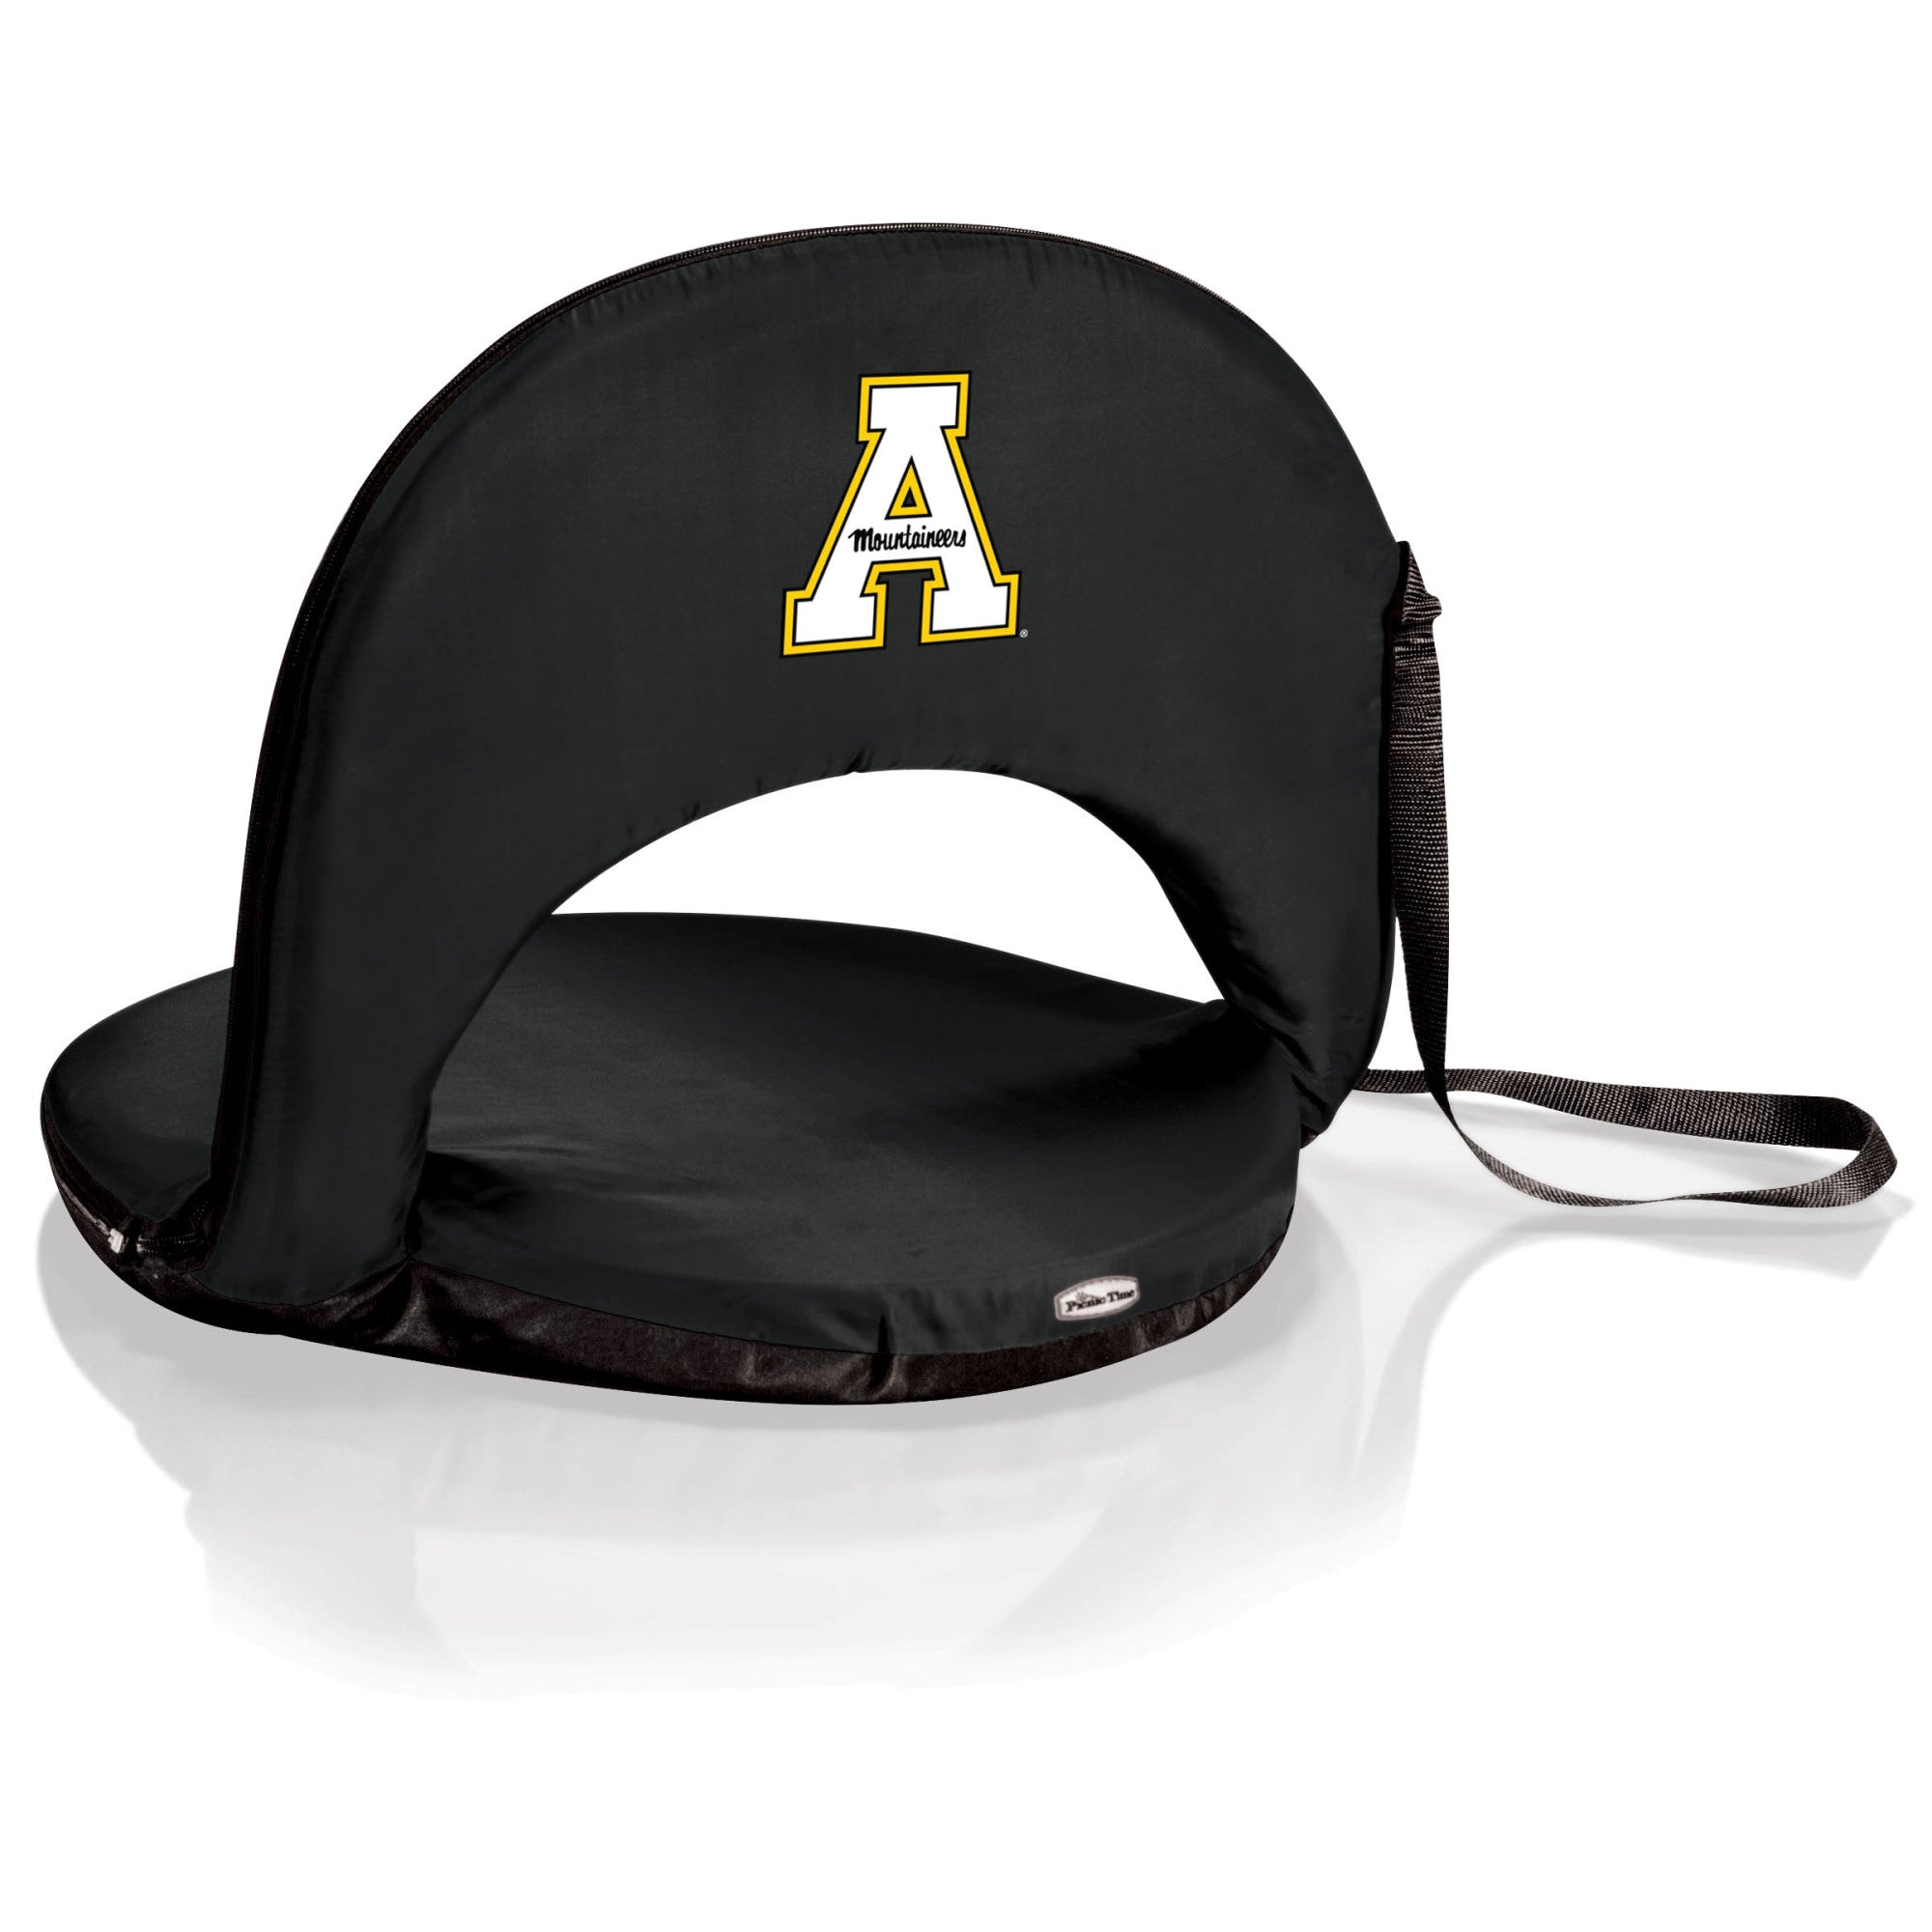 App State Mountaineers - Oniva Portable Reclining Seat